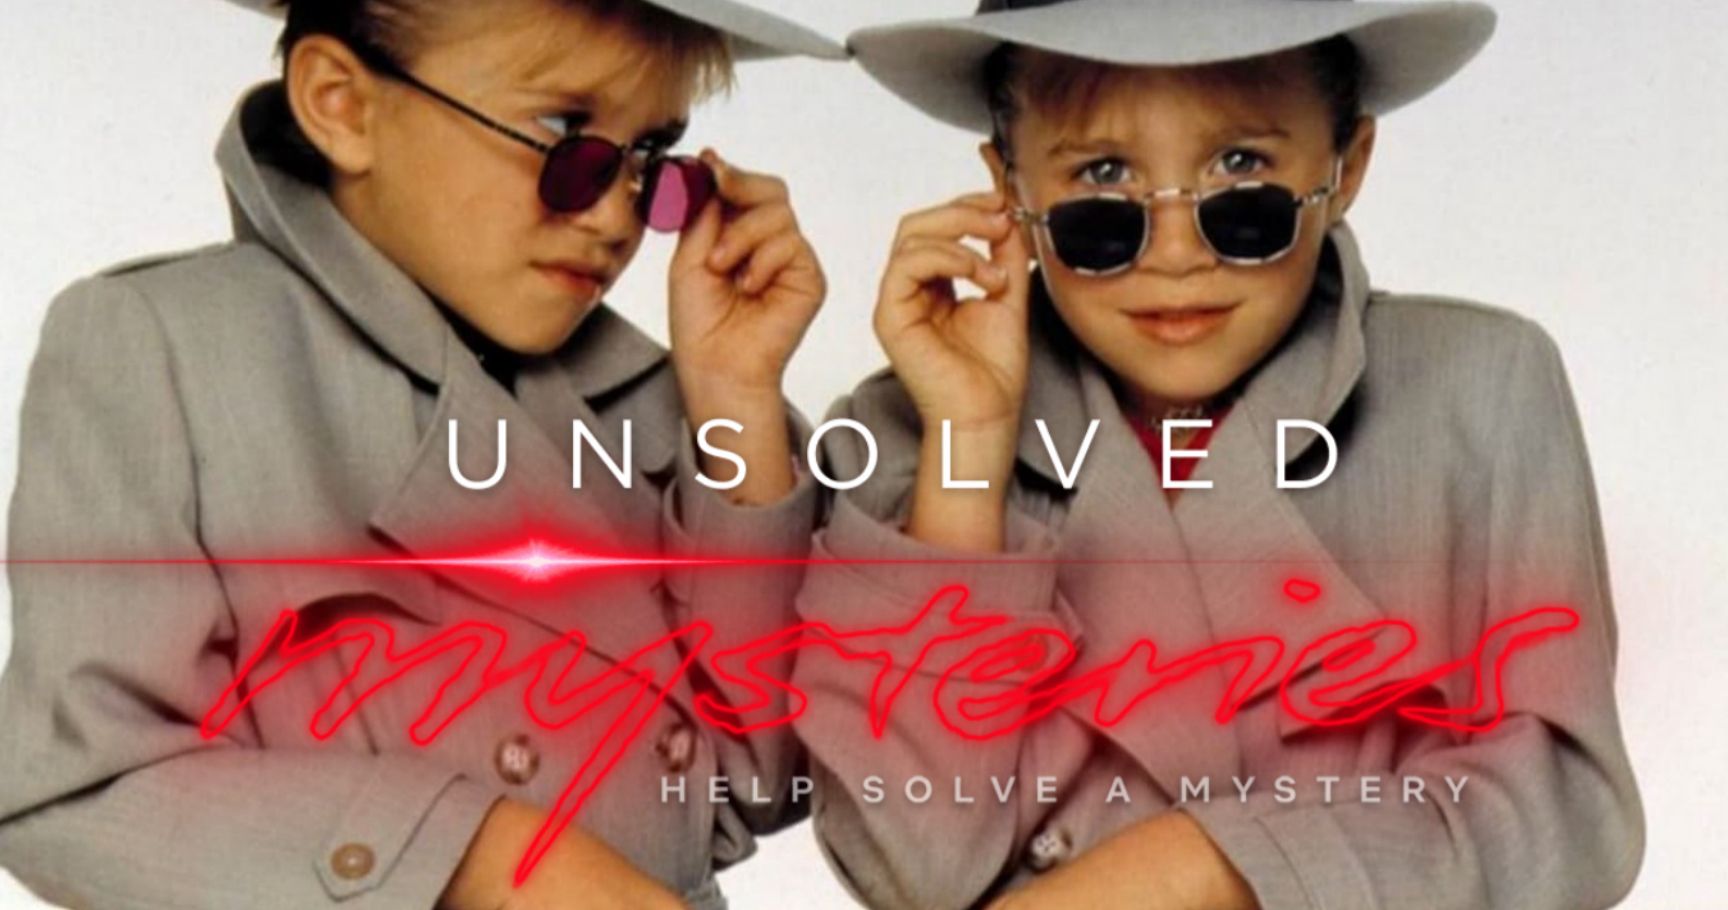 Netflix Agrees That the Olsen Twins Could Help Solve a Few Unsolved Mysteries